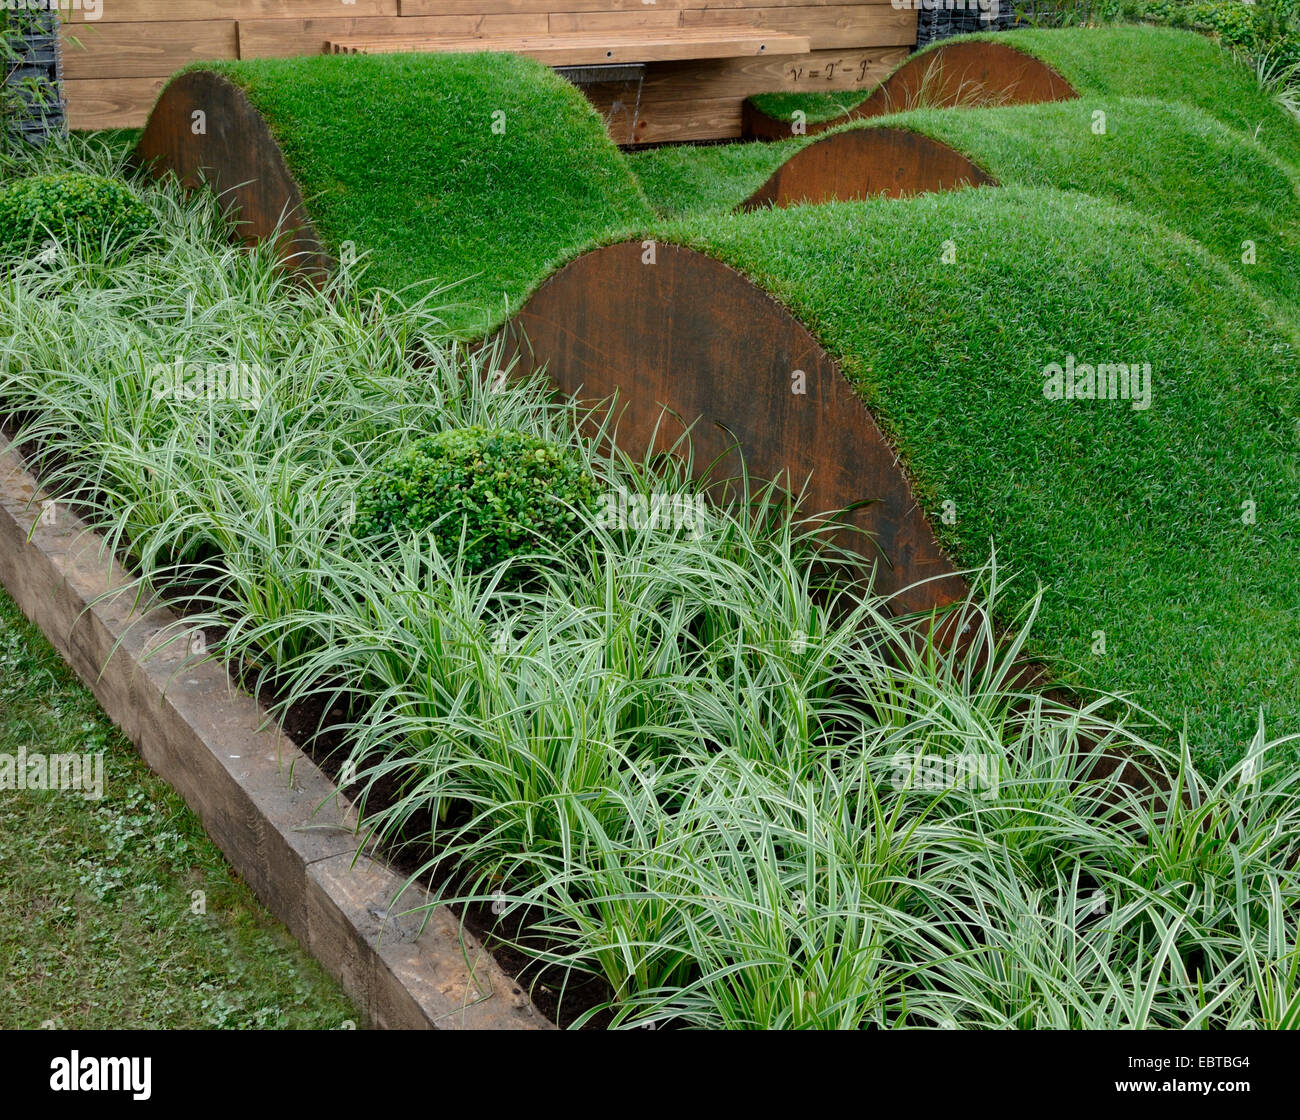 Undulating lawns in a garden replicating sound waves with grasses and lavender Stock Photo